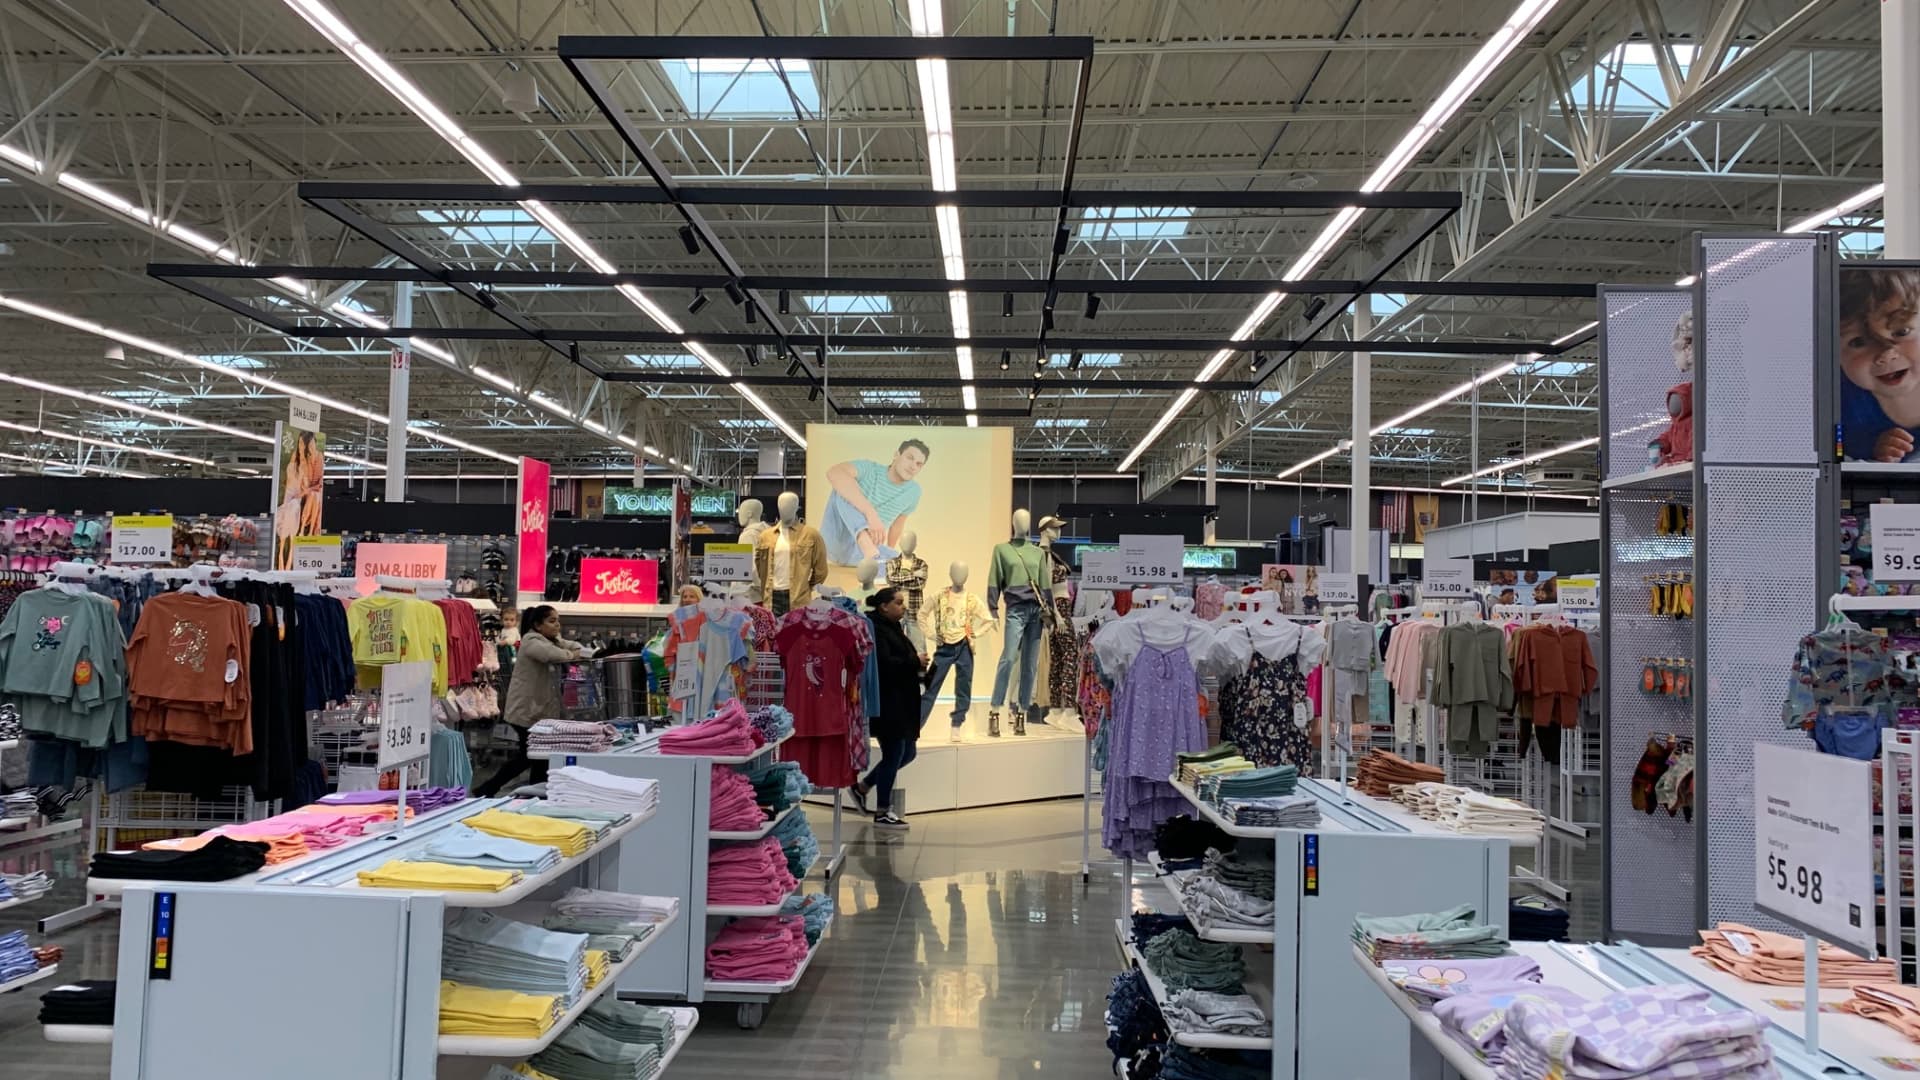 At Walmart's flagship stores, like the one in Teterboro, NJ, Walmart plays up a lot of its exclusive brands like activewear brand, Love & Sports, and Beautiful, a kitchen and home decor line developed with Drew Barrymore.